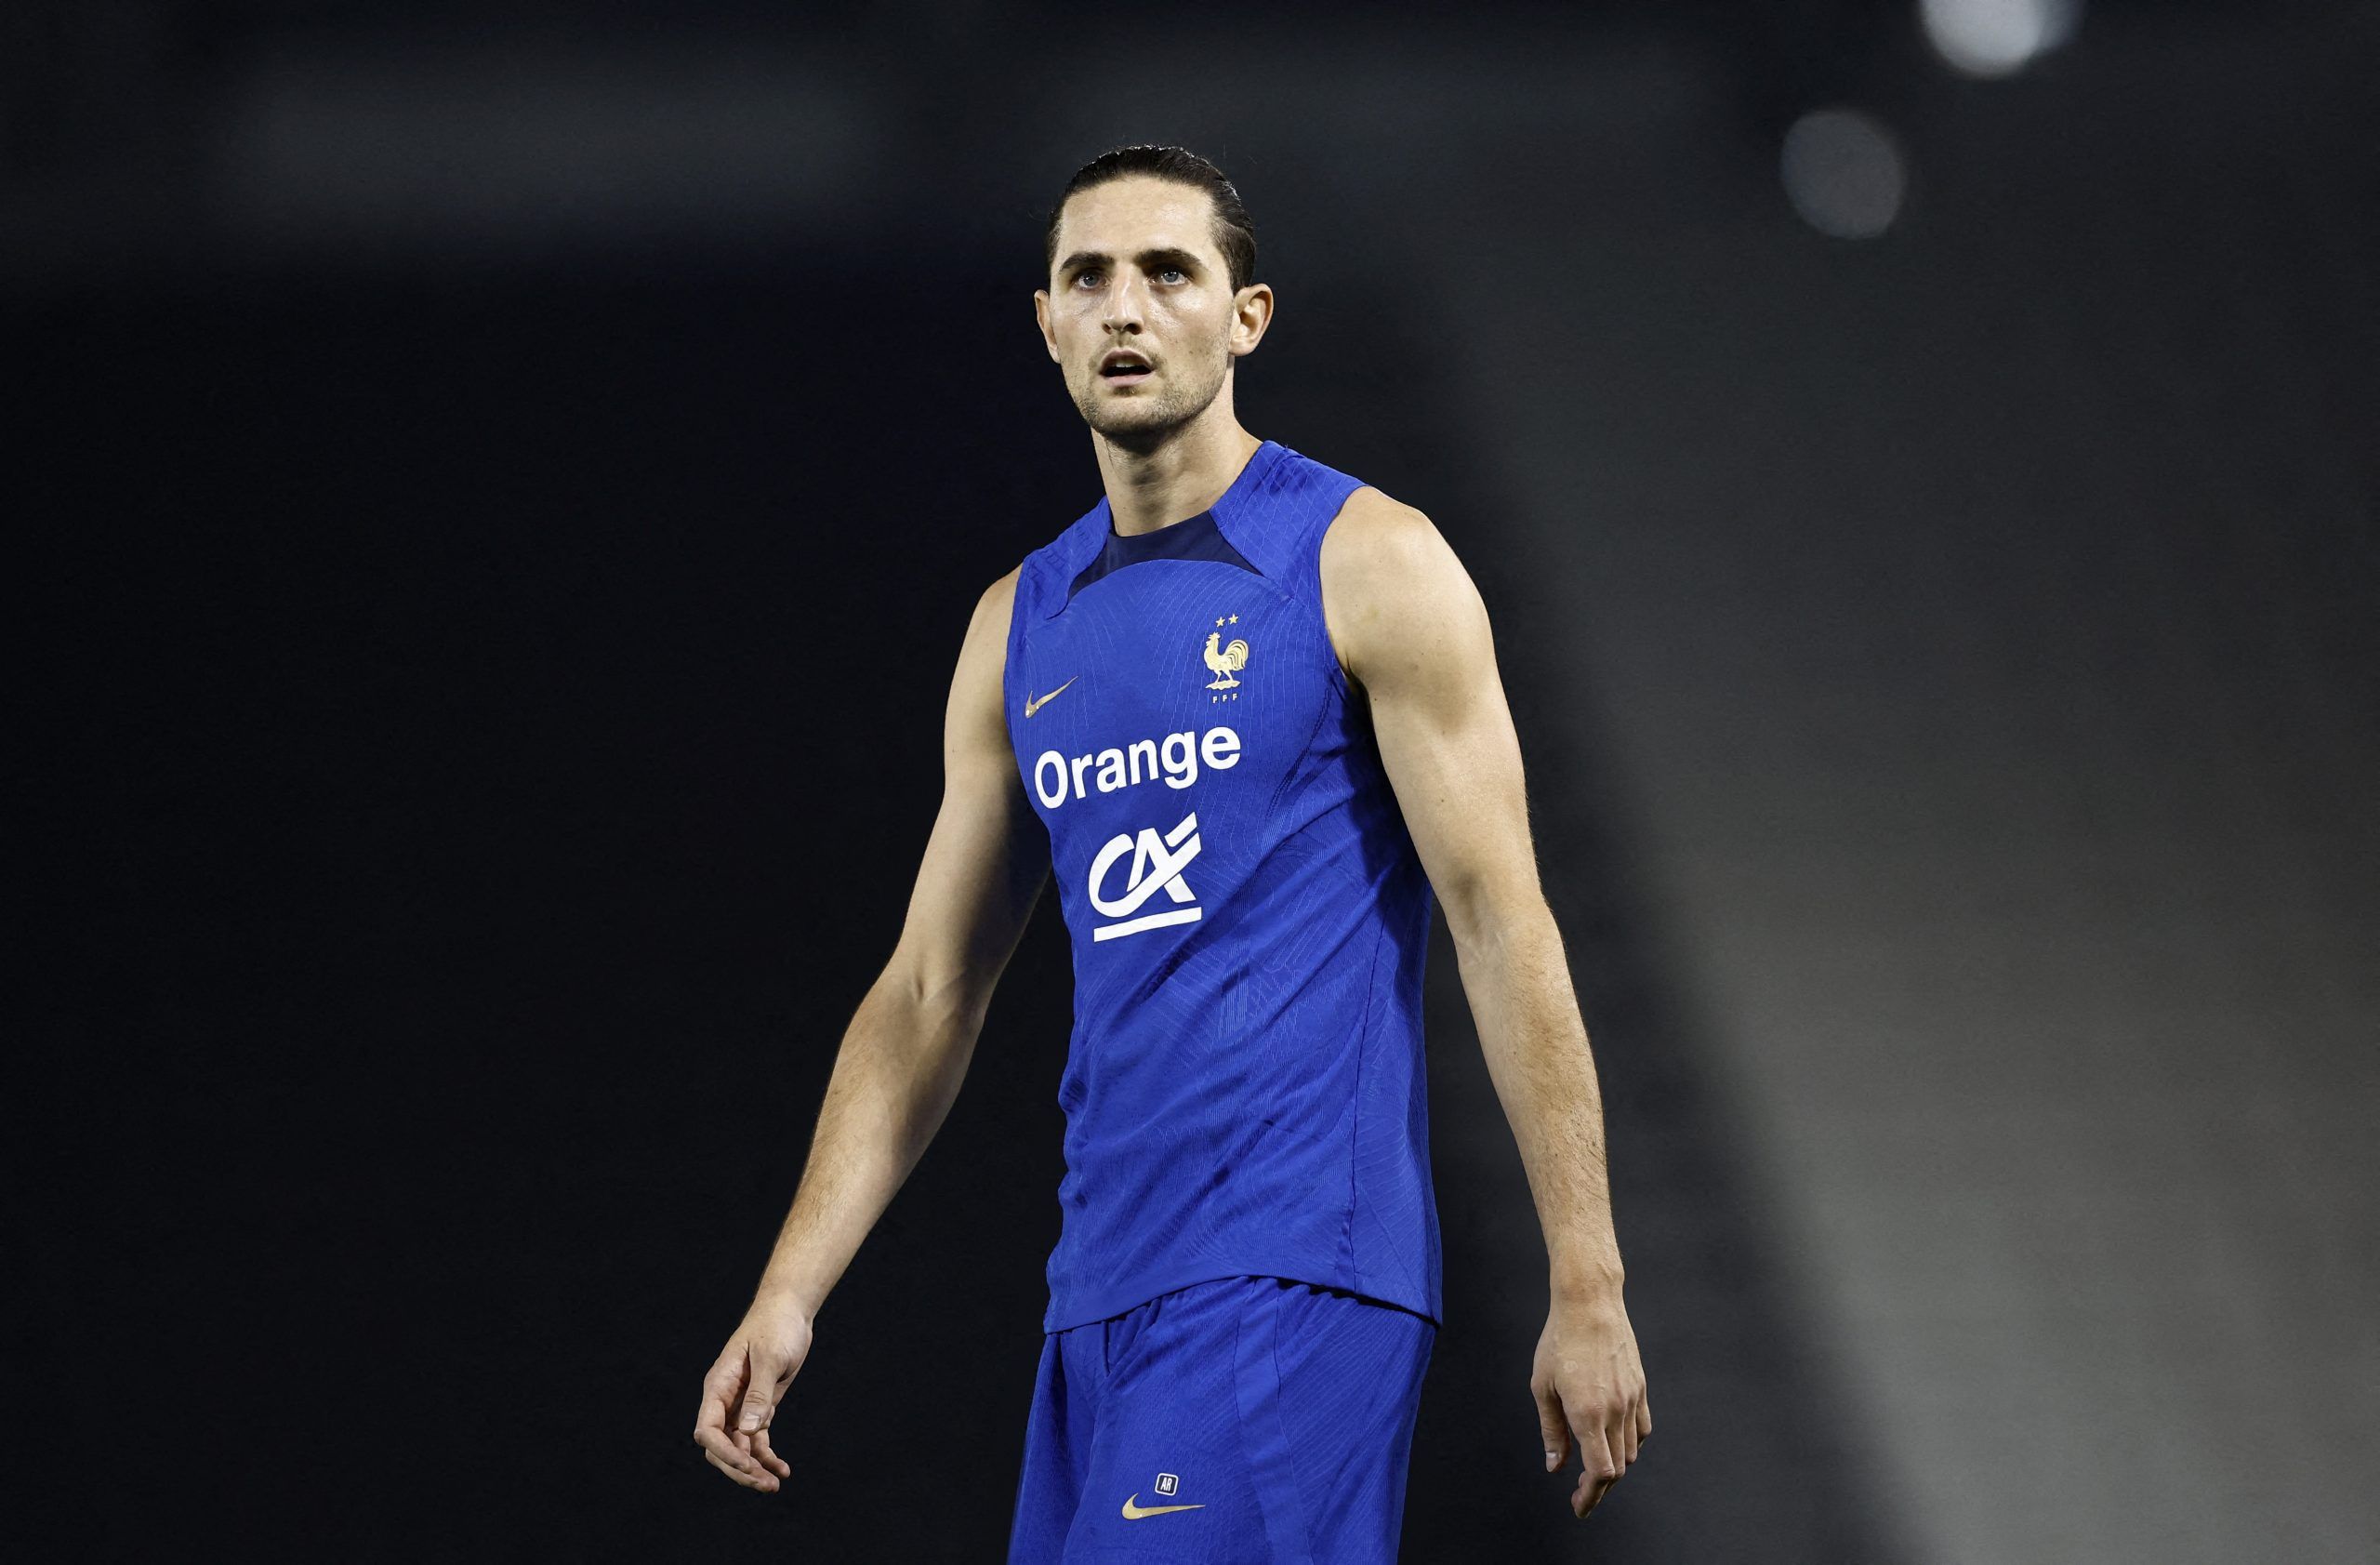 Arsenal: Gunners want to sign Adrien Rabiot ‘immediately’ -Arsenal News